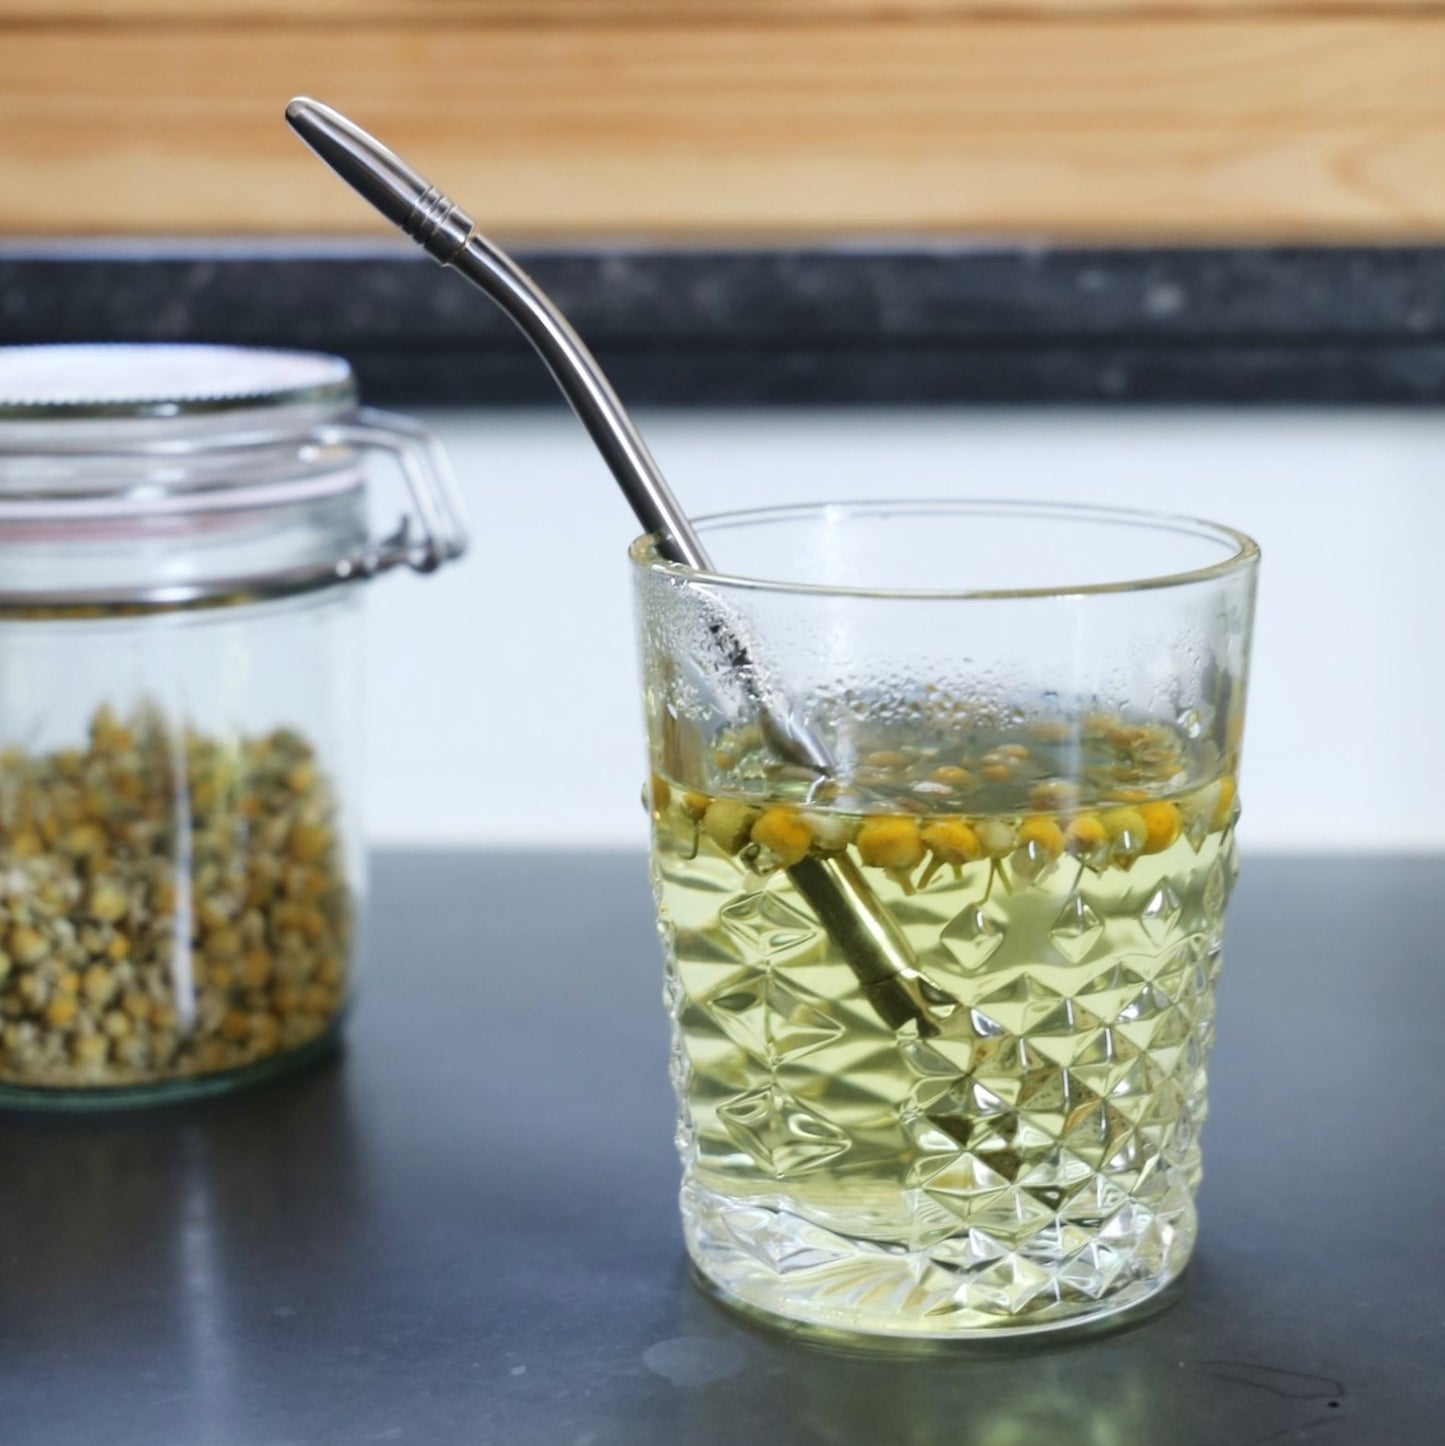 tea straw and strainer made of stainless steel being use for a tea